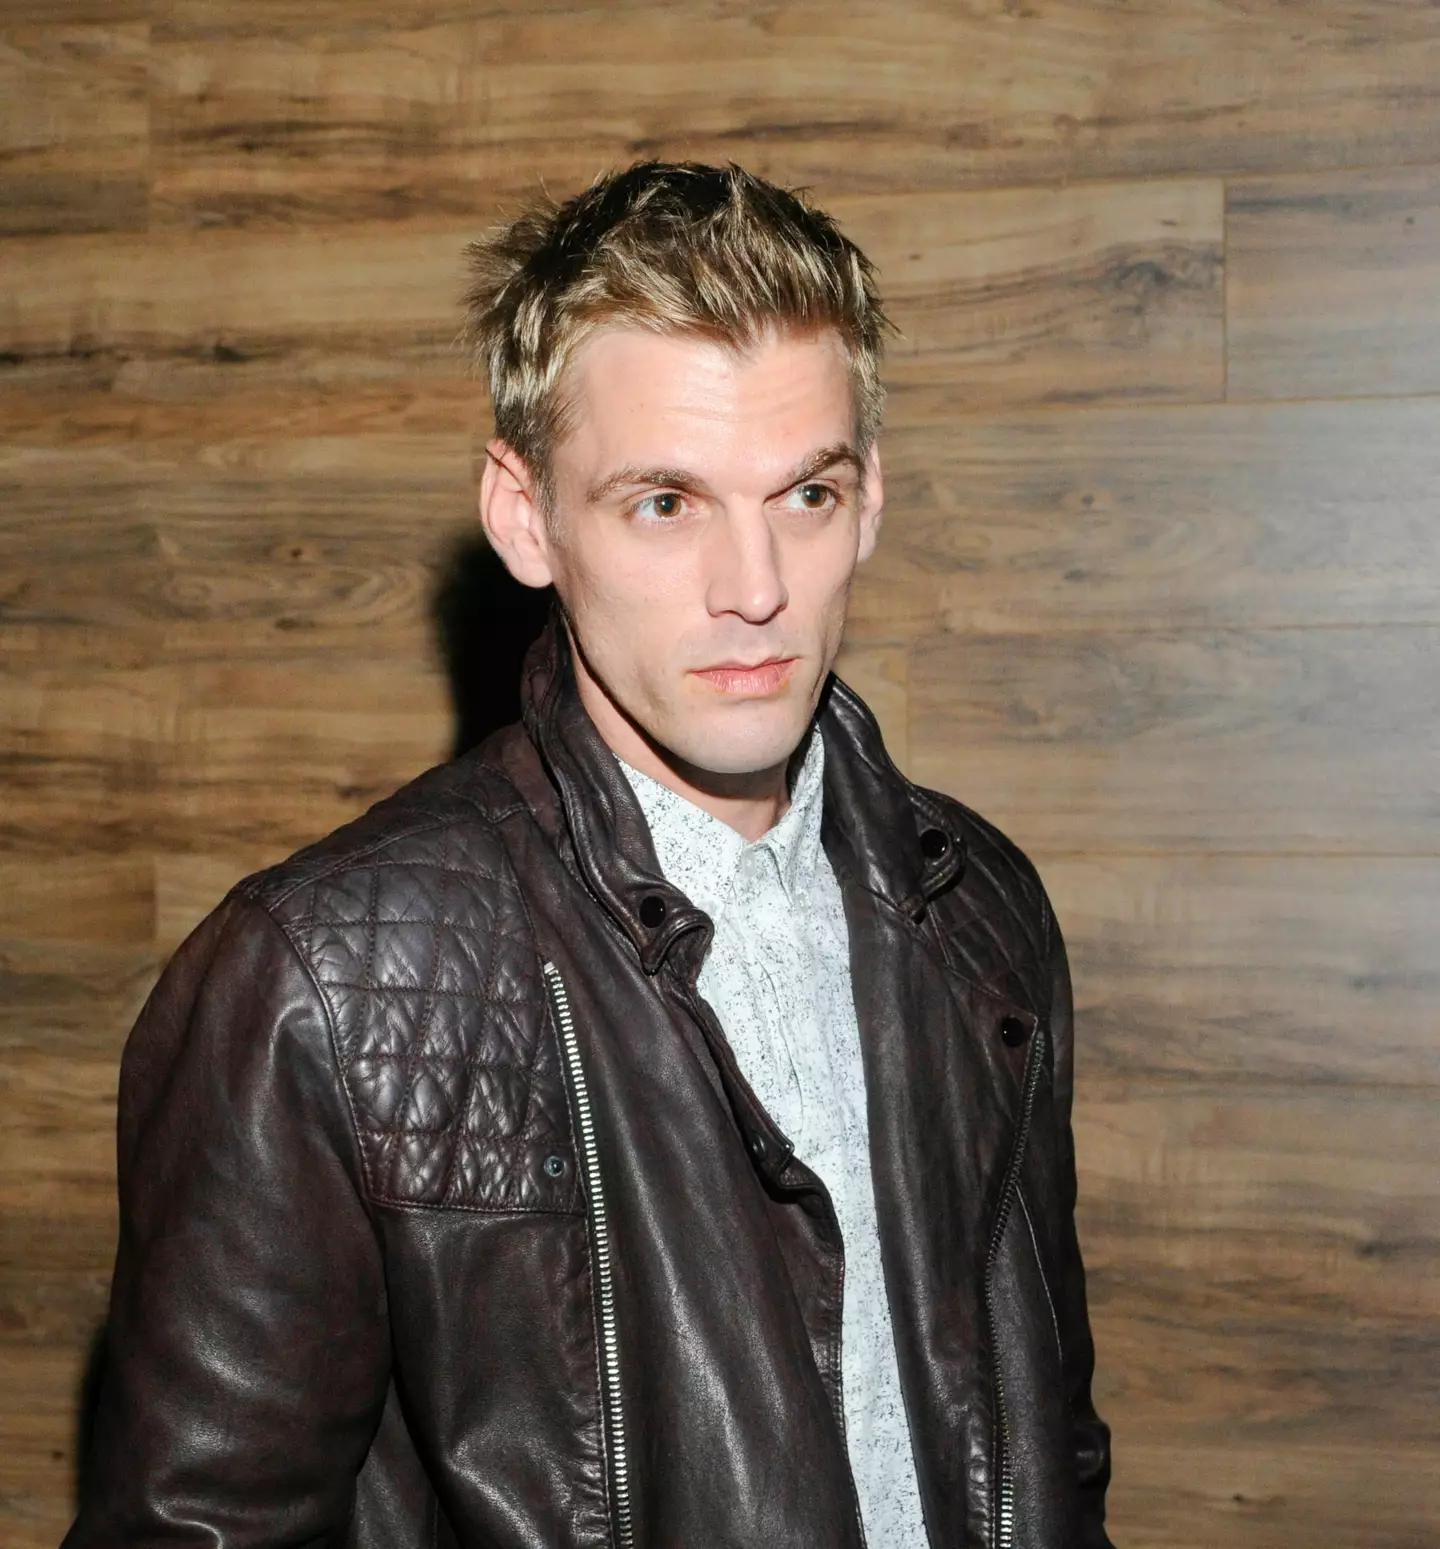 Aaron Carter passed away at age 34 this week.